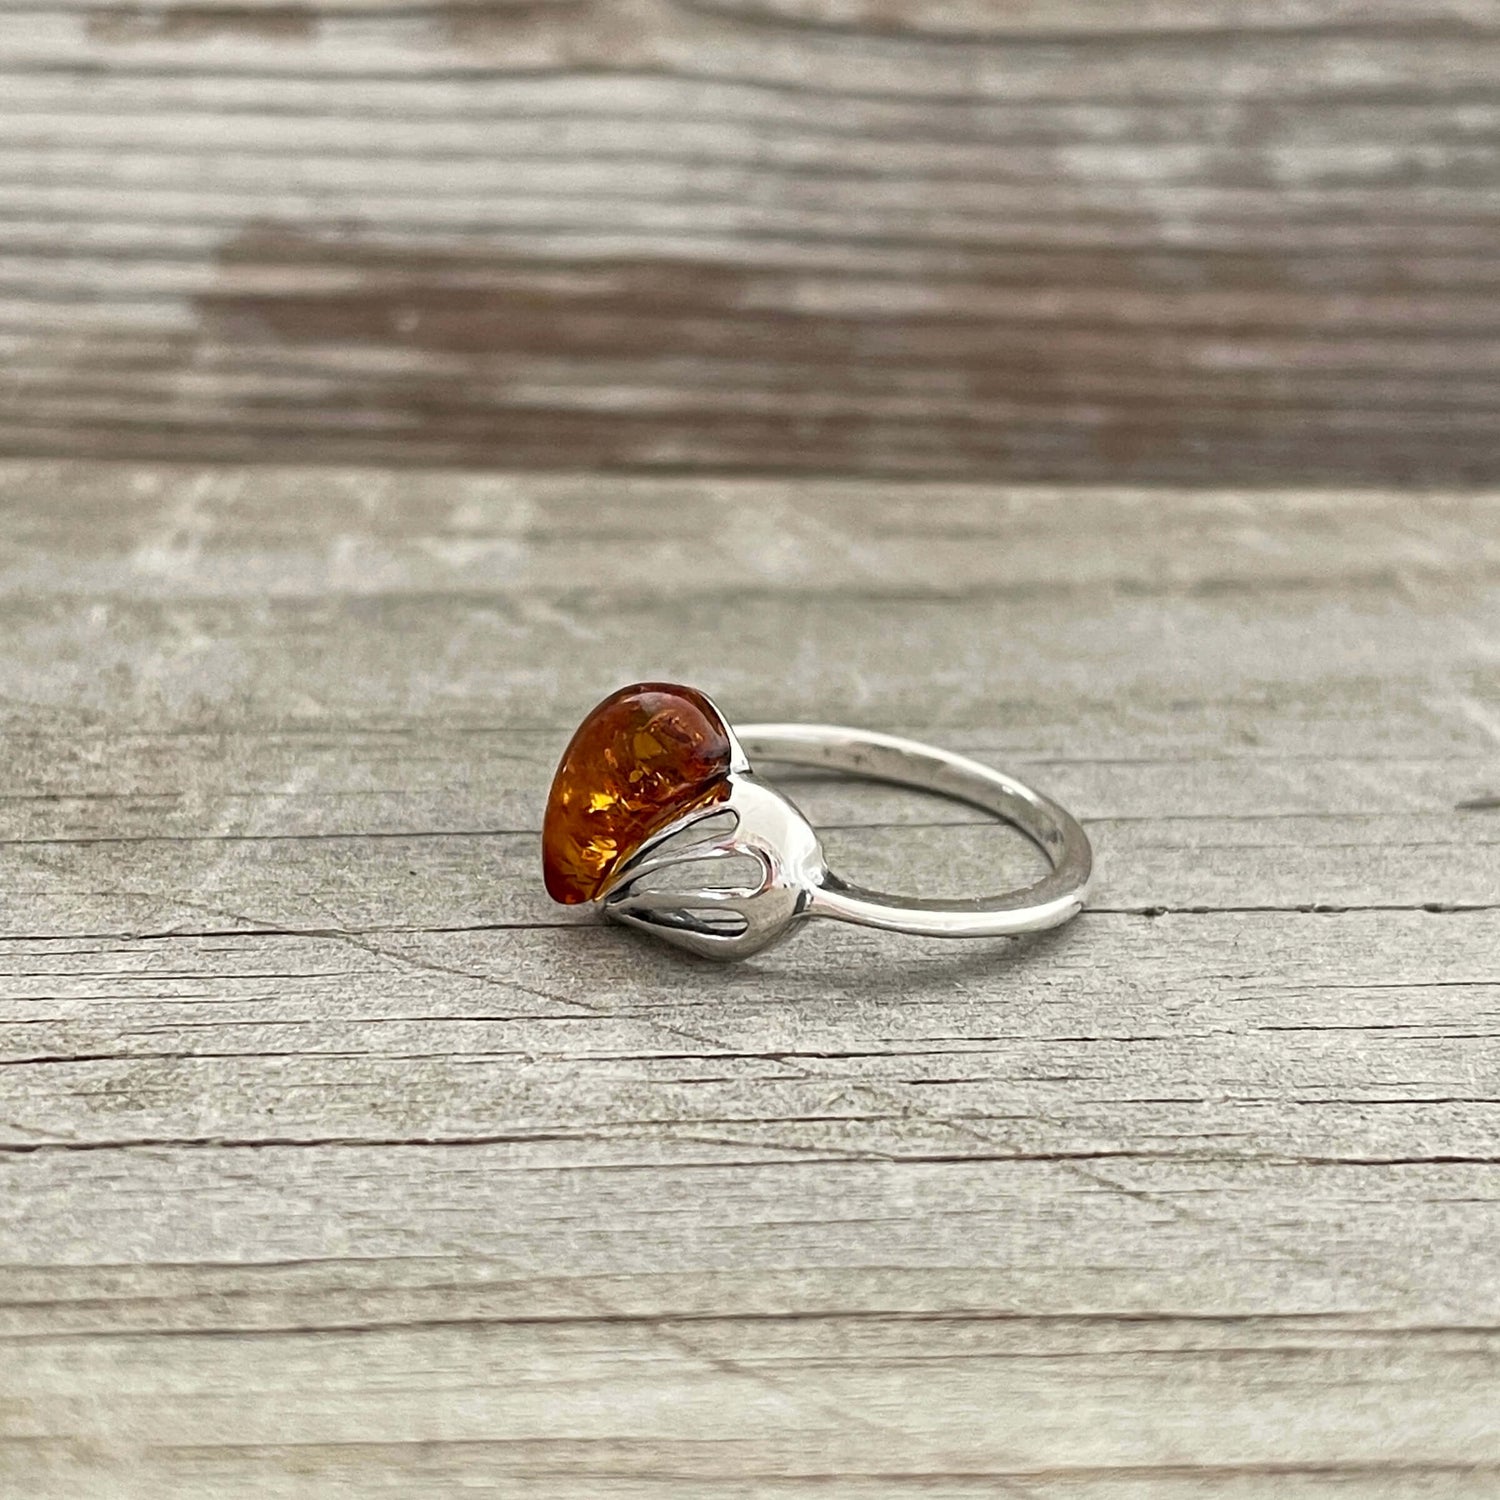 heart shaped amber and sterling silver ring